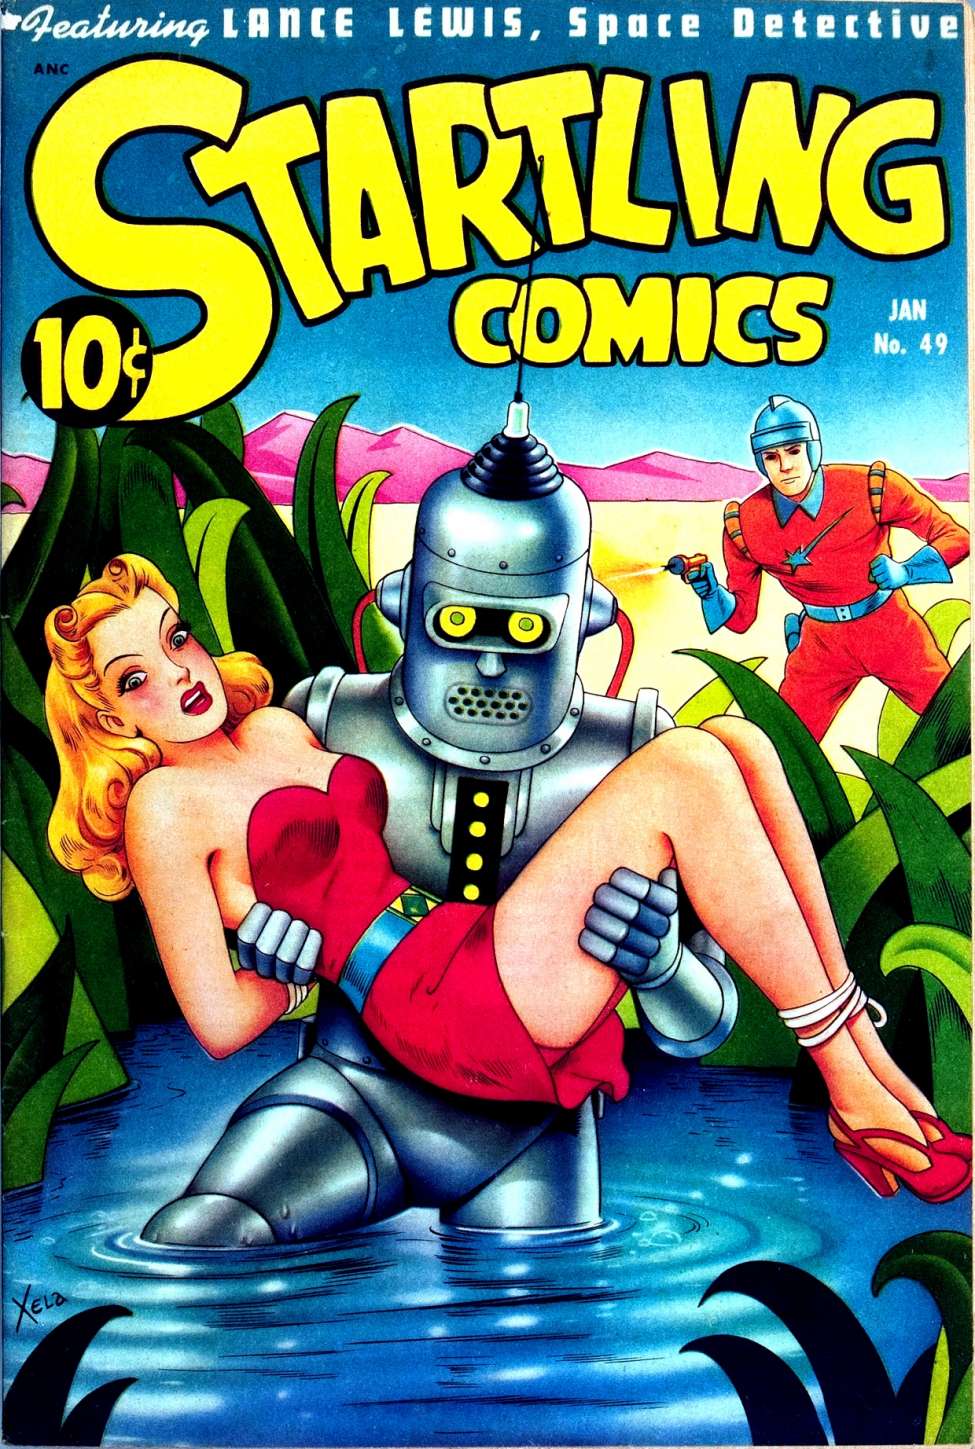 Comic Book Cover For Startling Comics 49